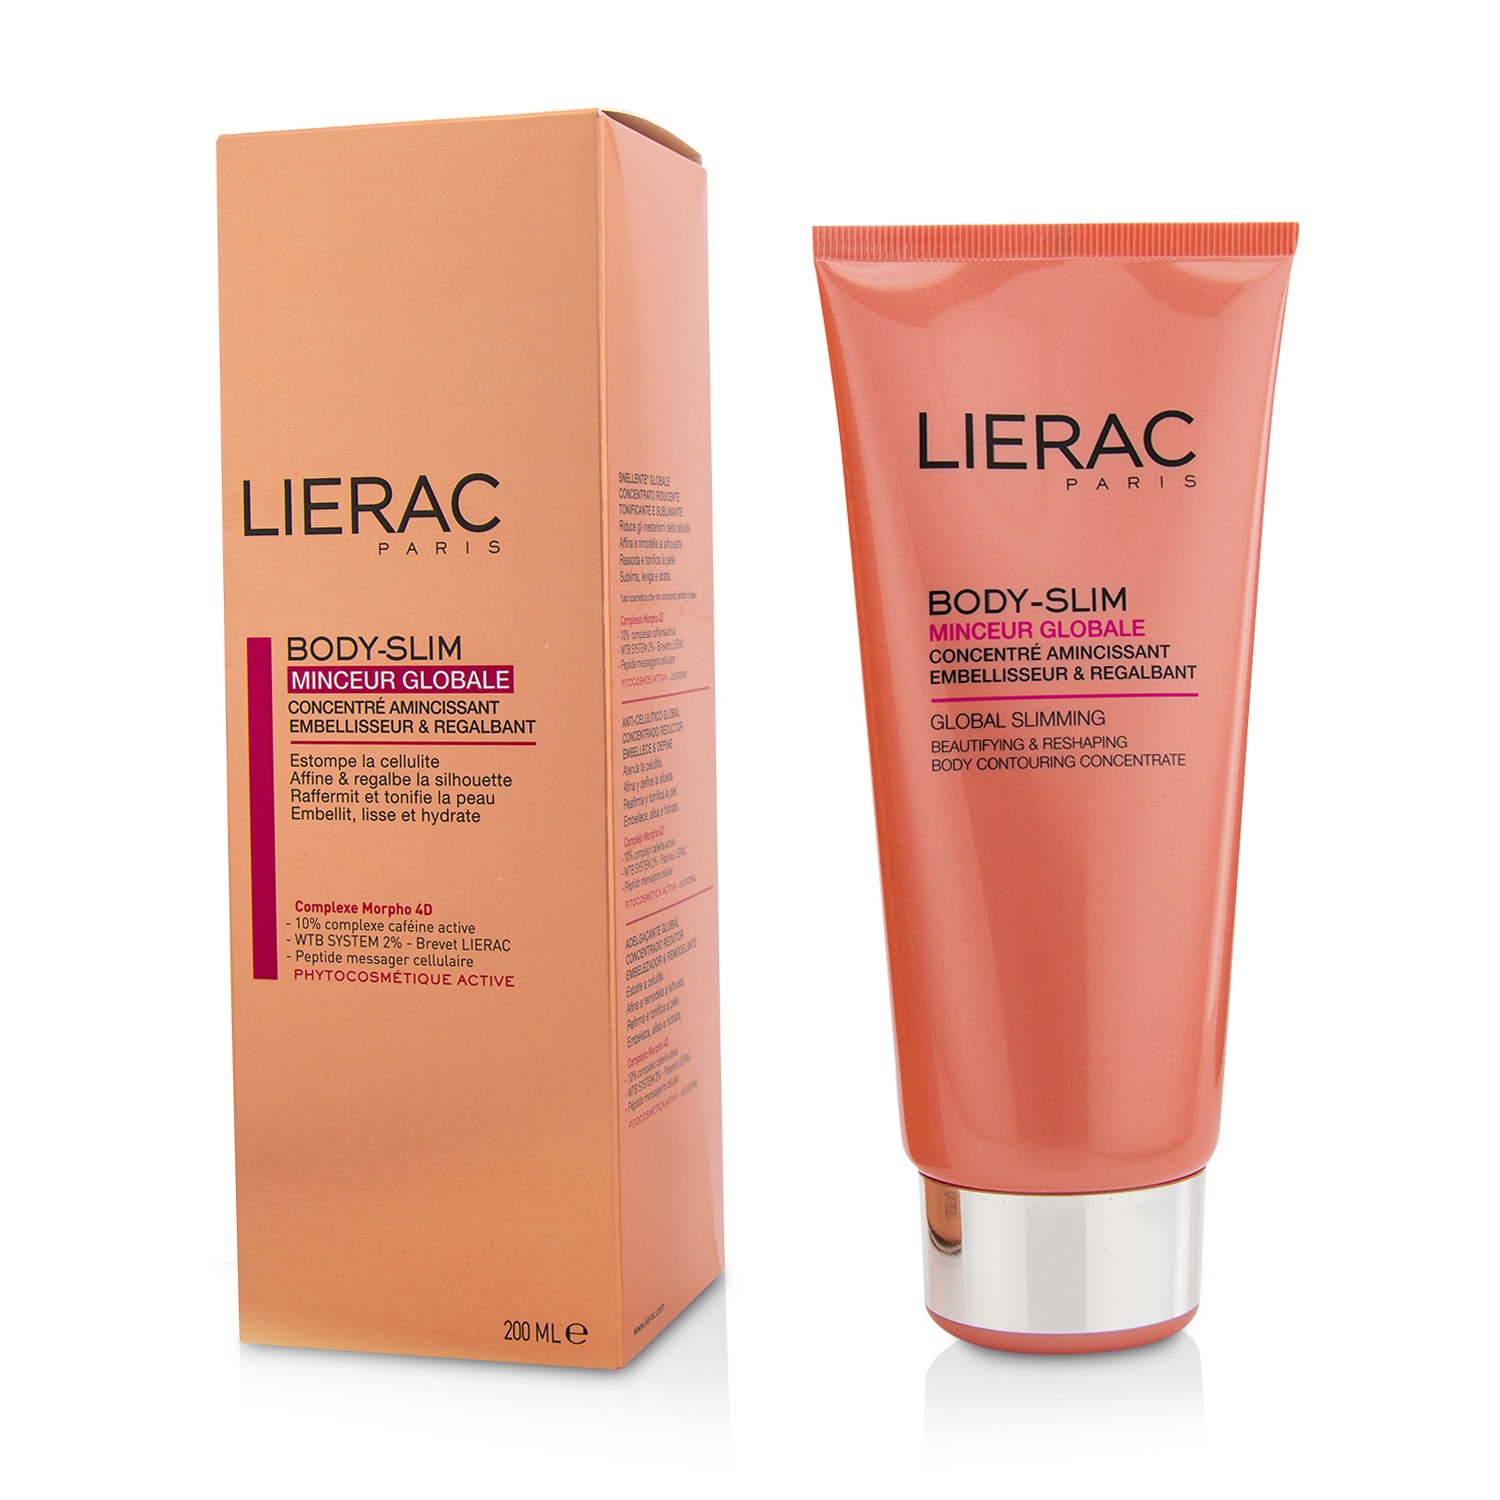 Body-Slim Global Slimming Beautifying & Reshaping Body Contouring Concentrate Lierac Image